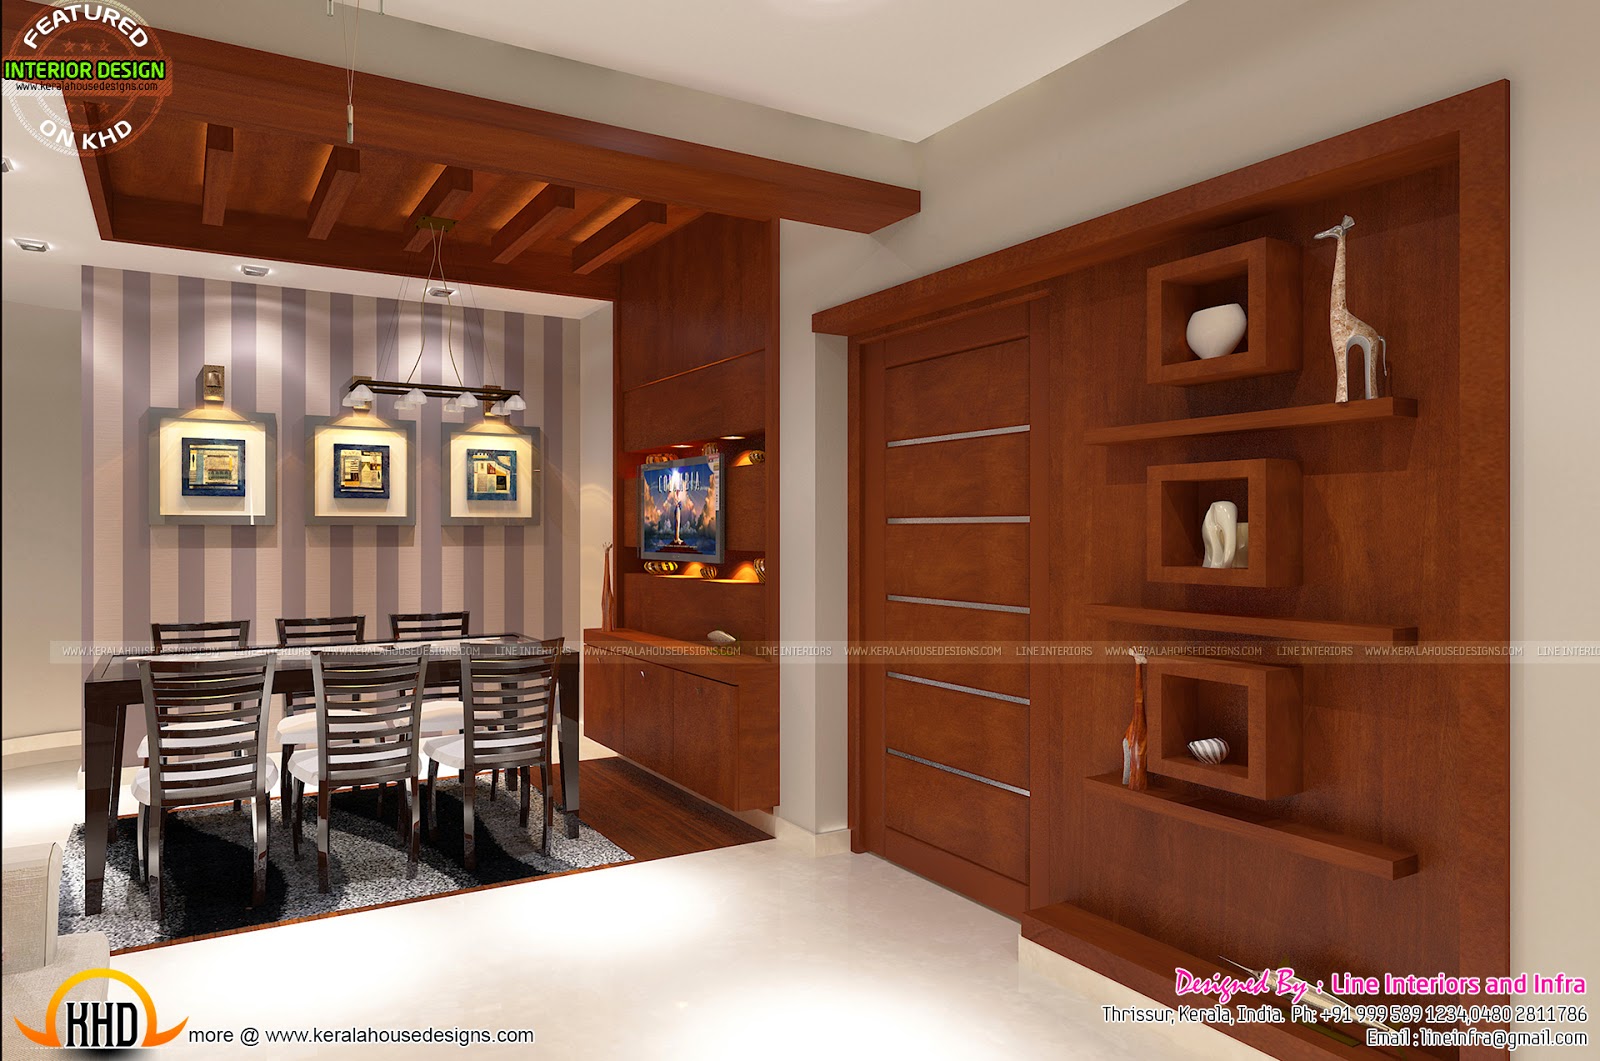 Interiors design  by Line Interiors and Infra Kerala  home  